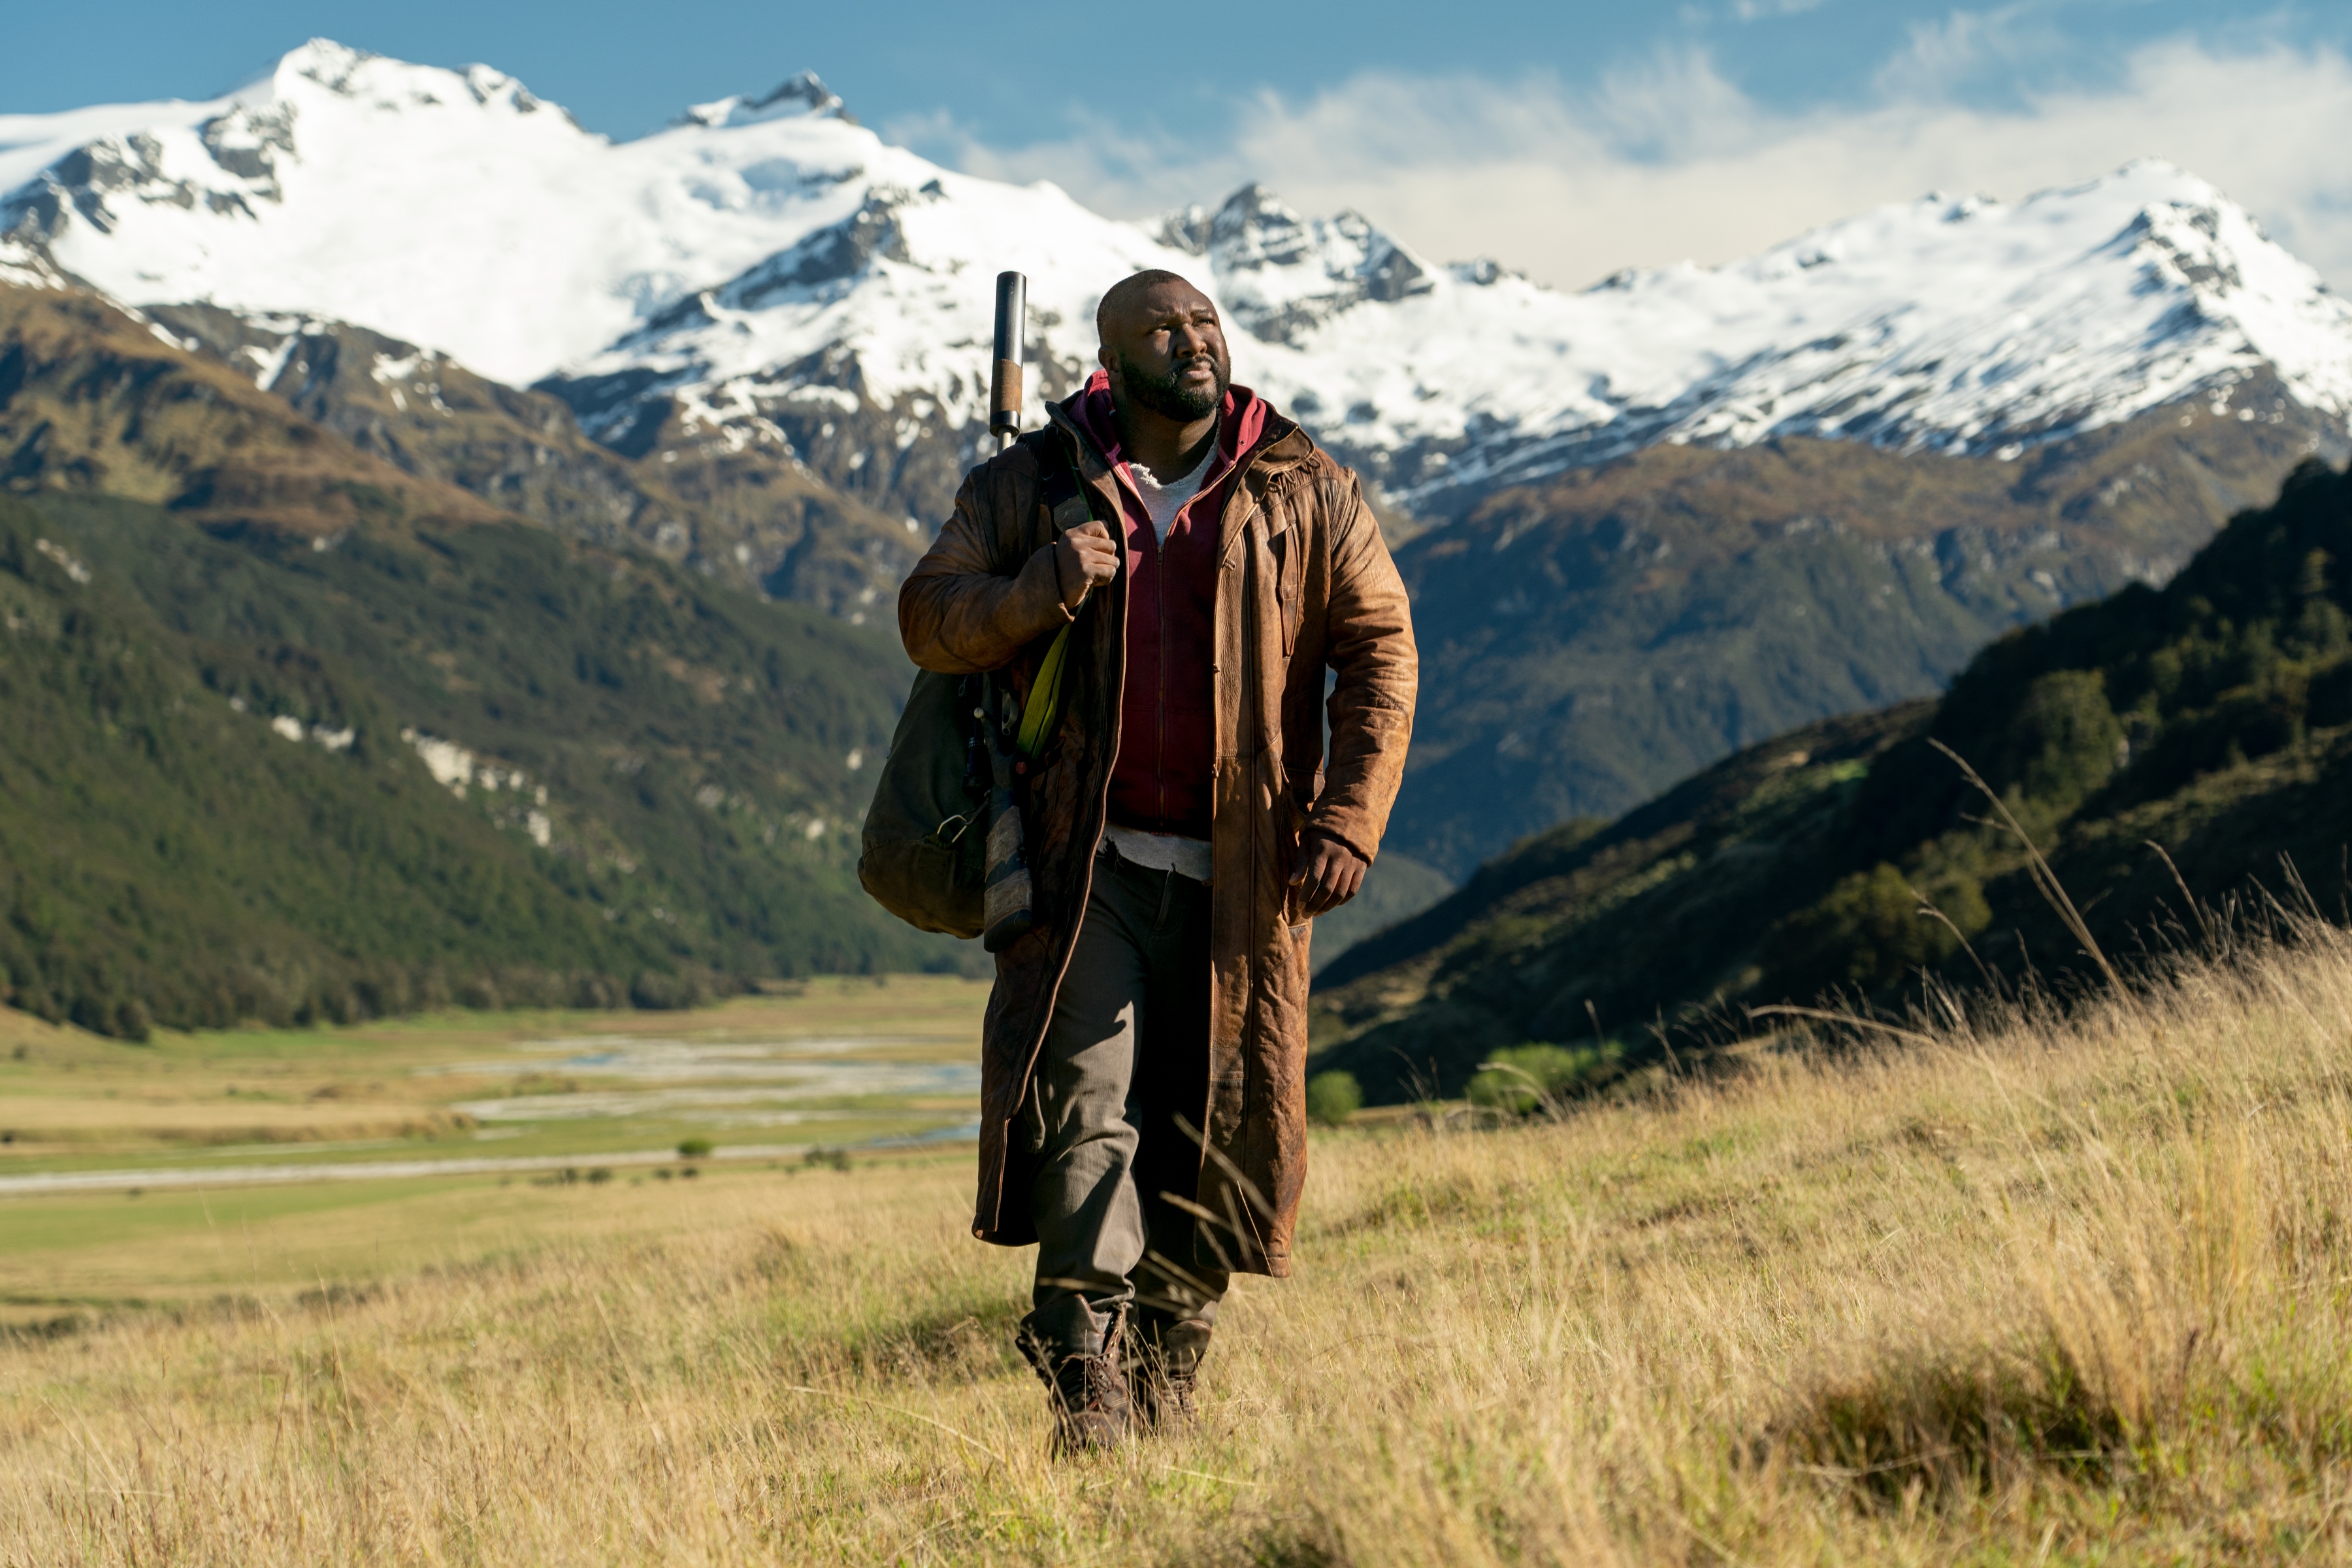 Nonso Anozie as Tommy Jepperd